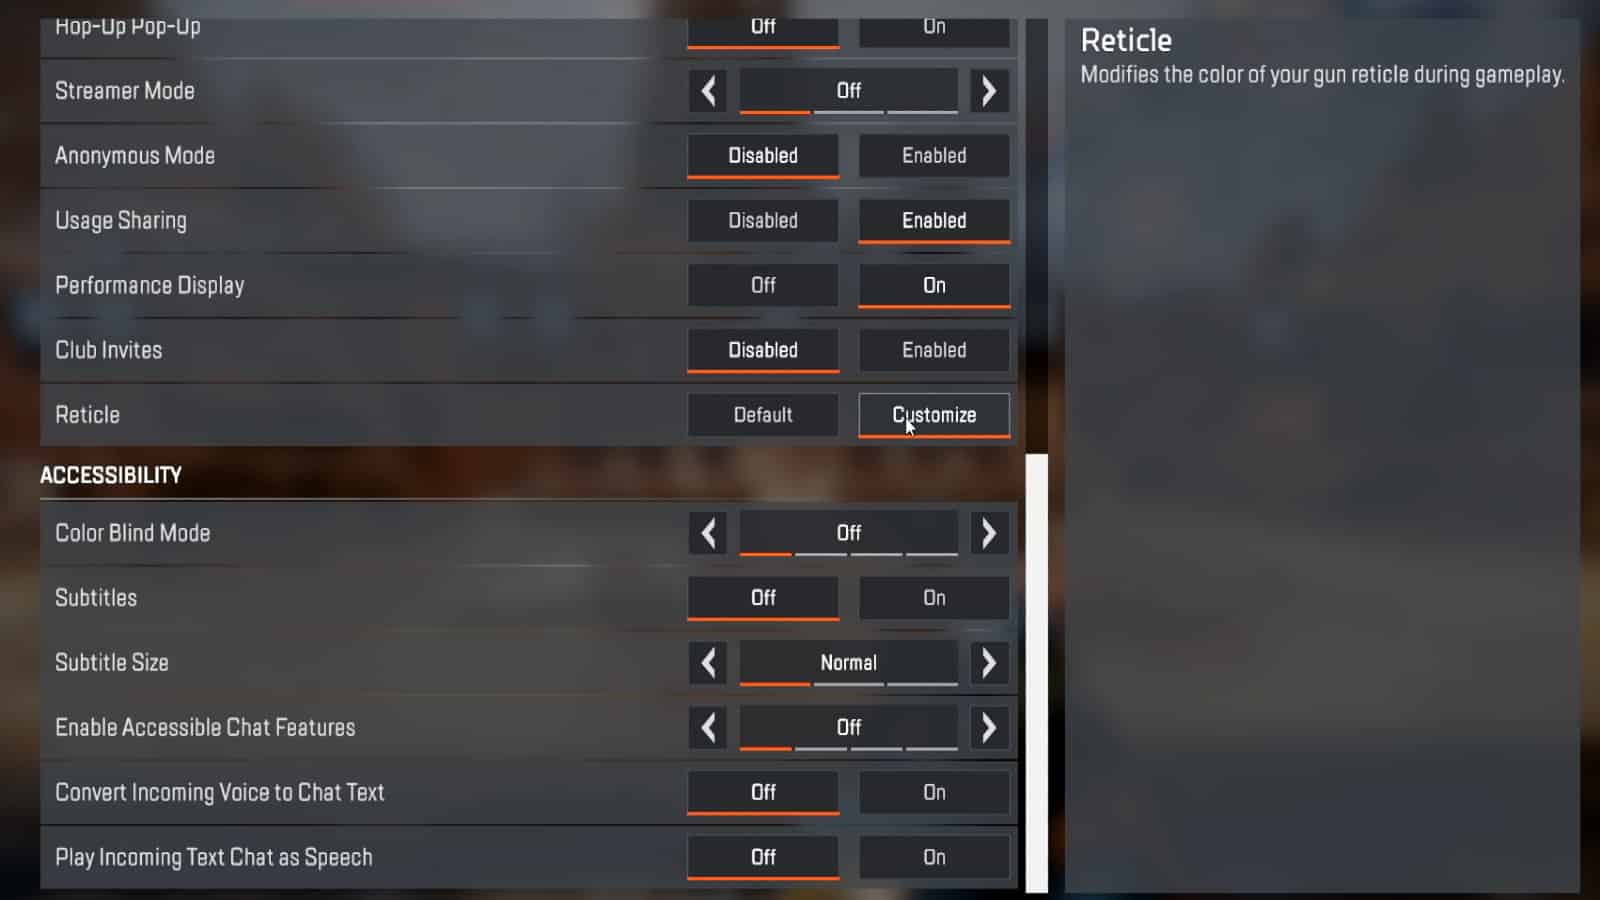 Reticle settings menu in Apex Legends lets players change the color of their sights